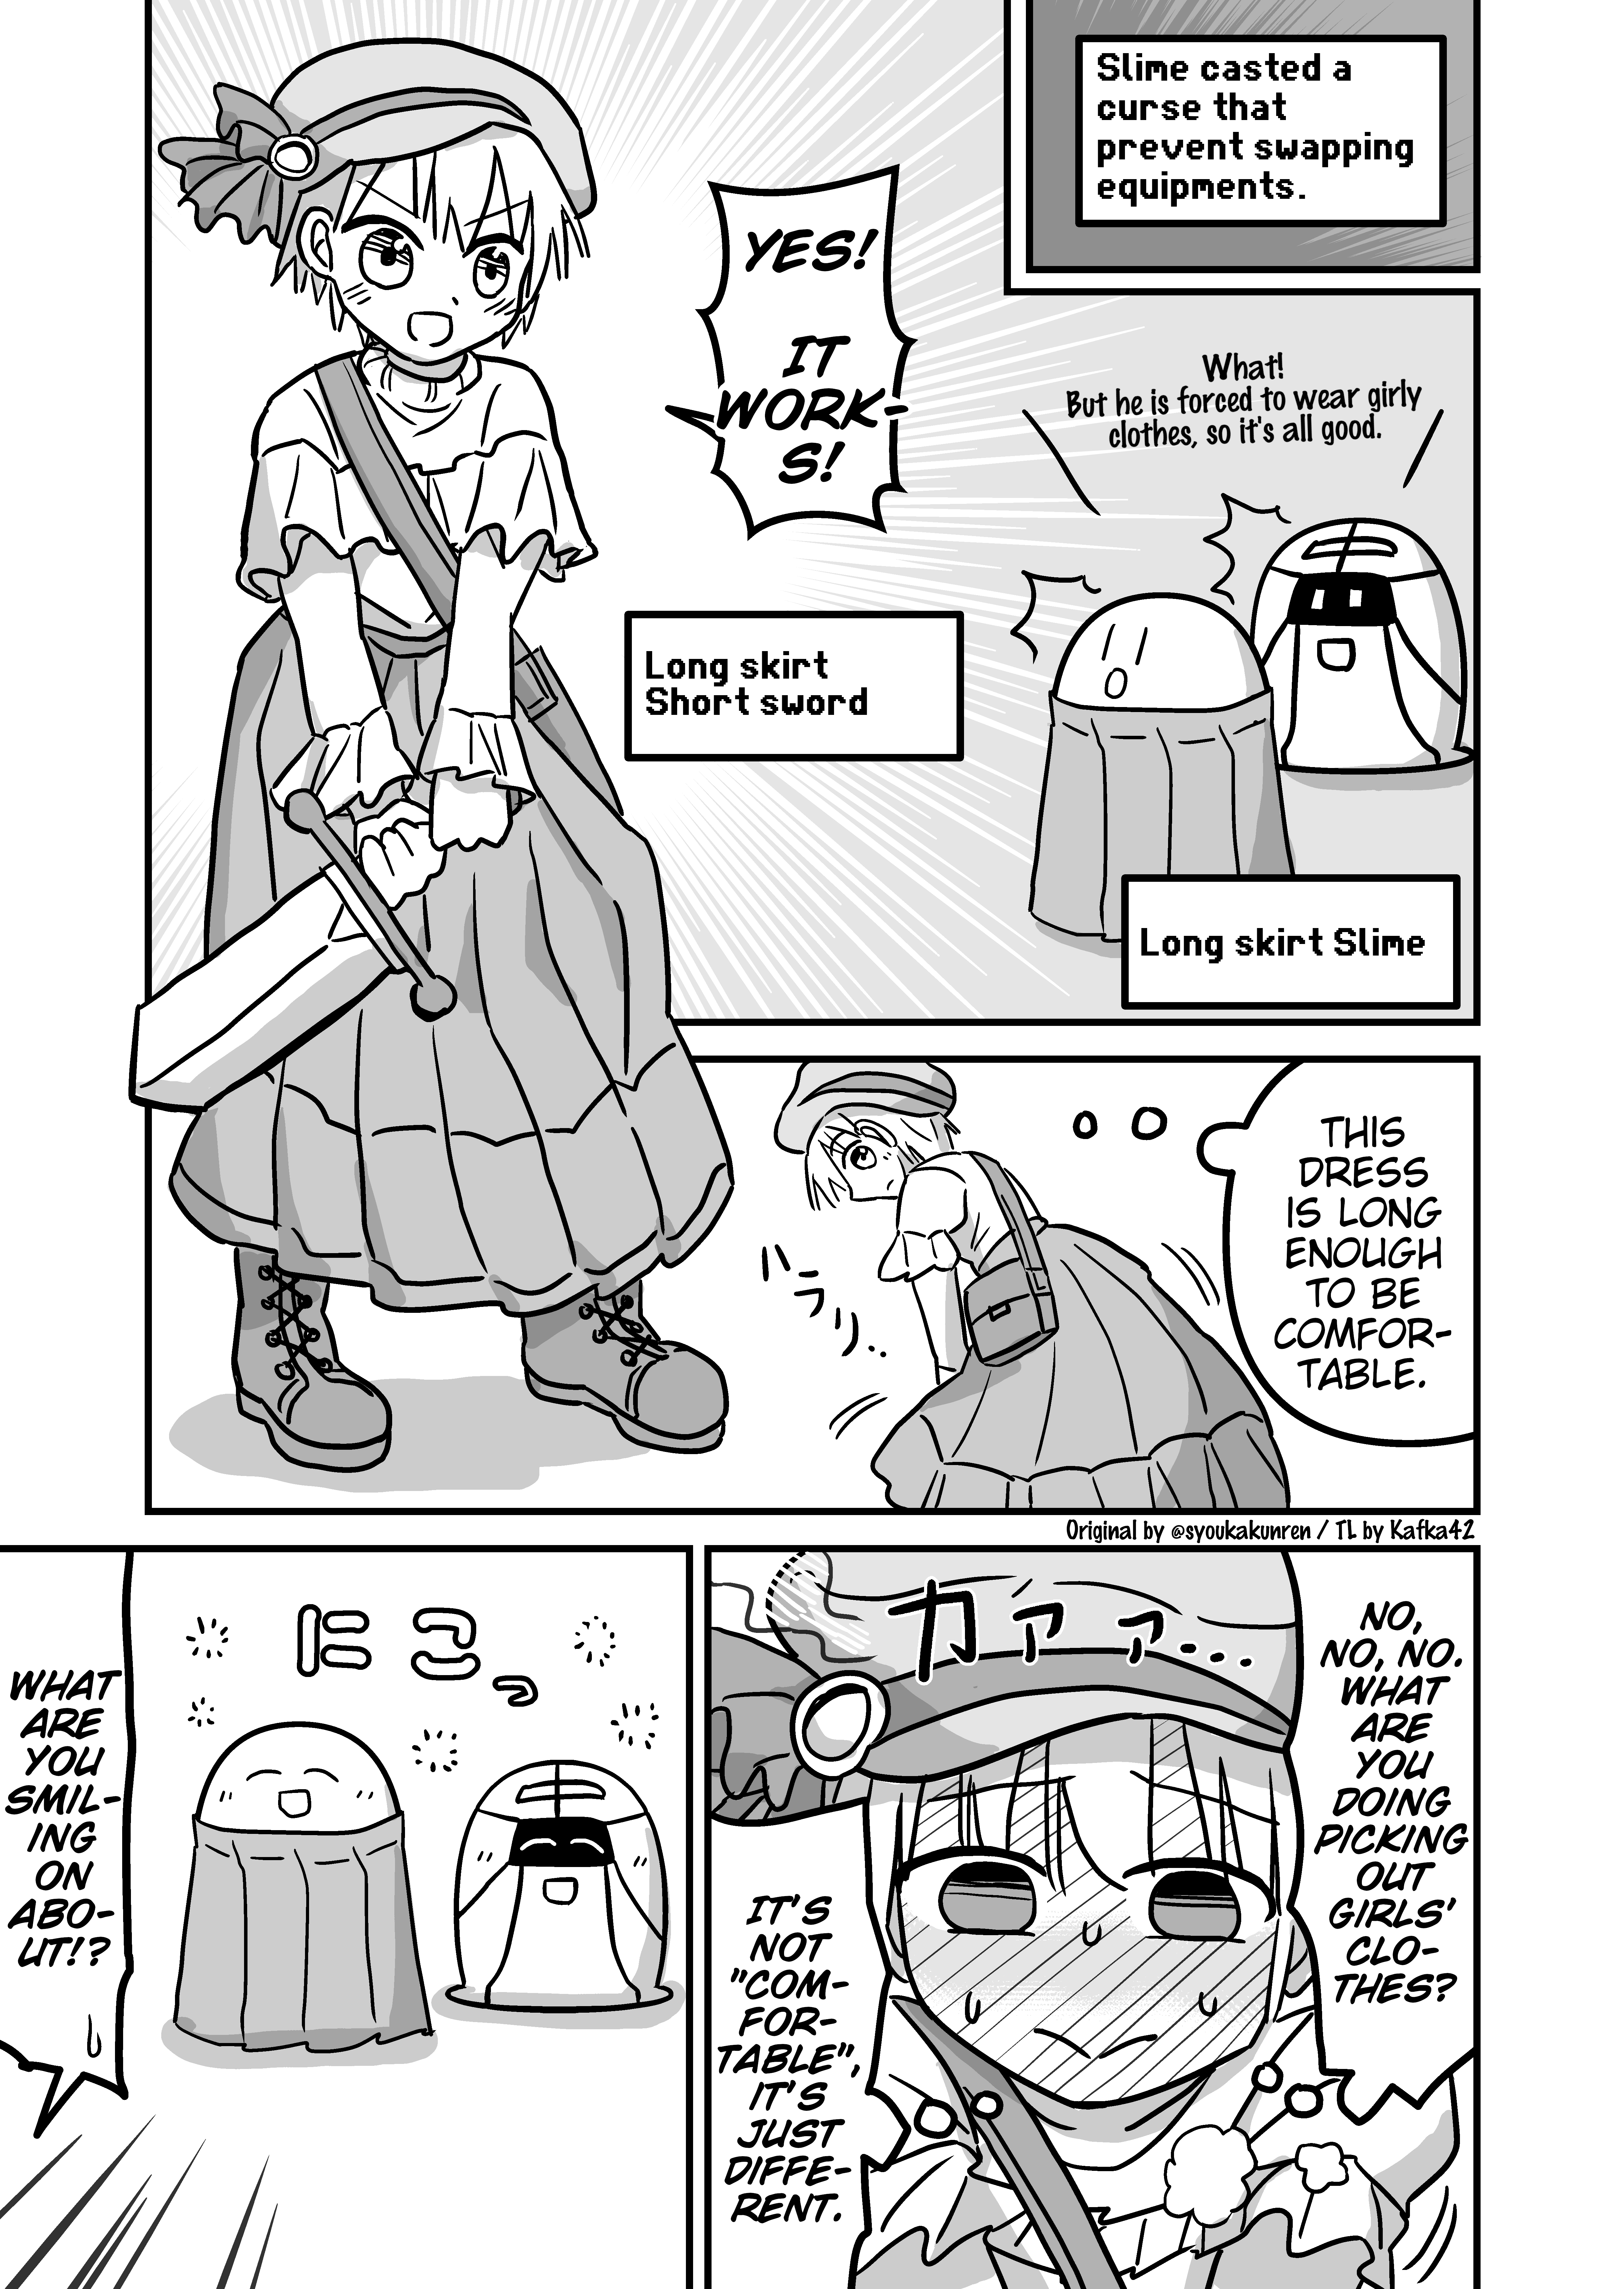 Crossdressing Quest - Page 2